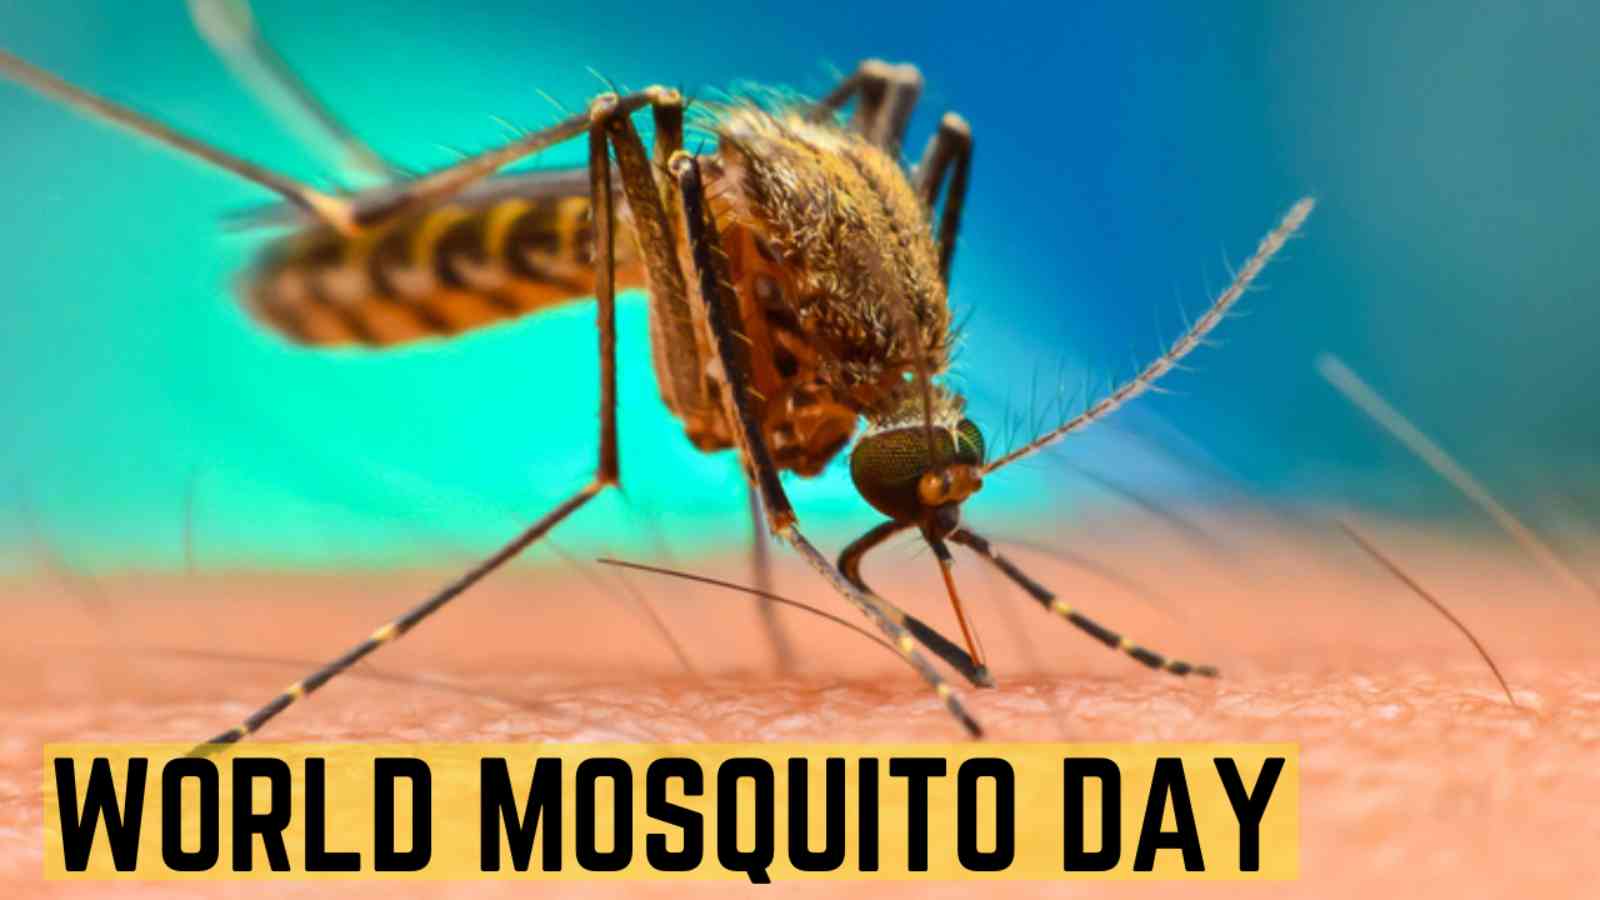 World Mosquito Day 2022: Date, History and Facts About Mosquitoes